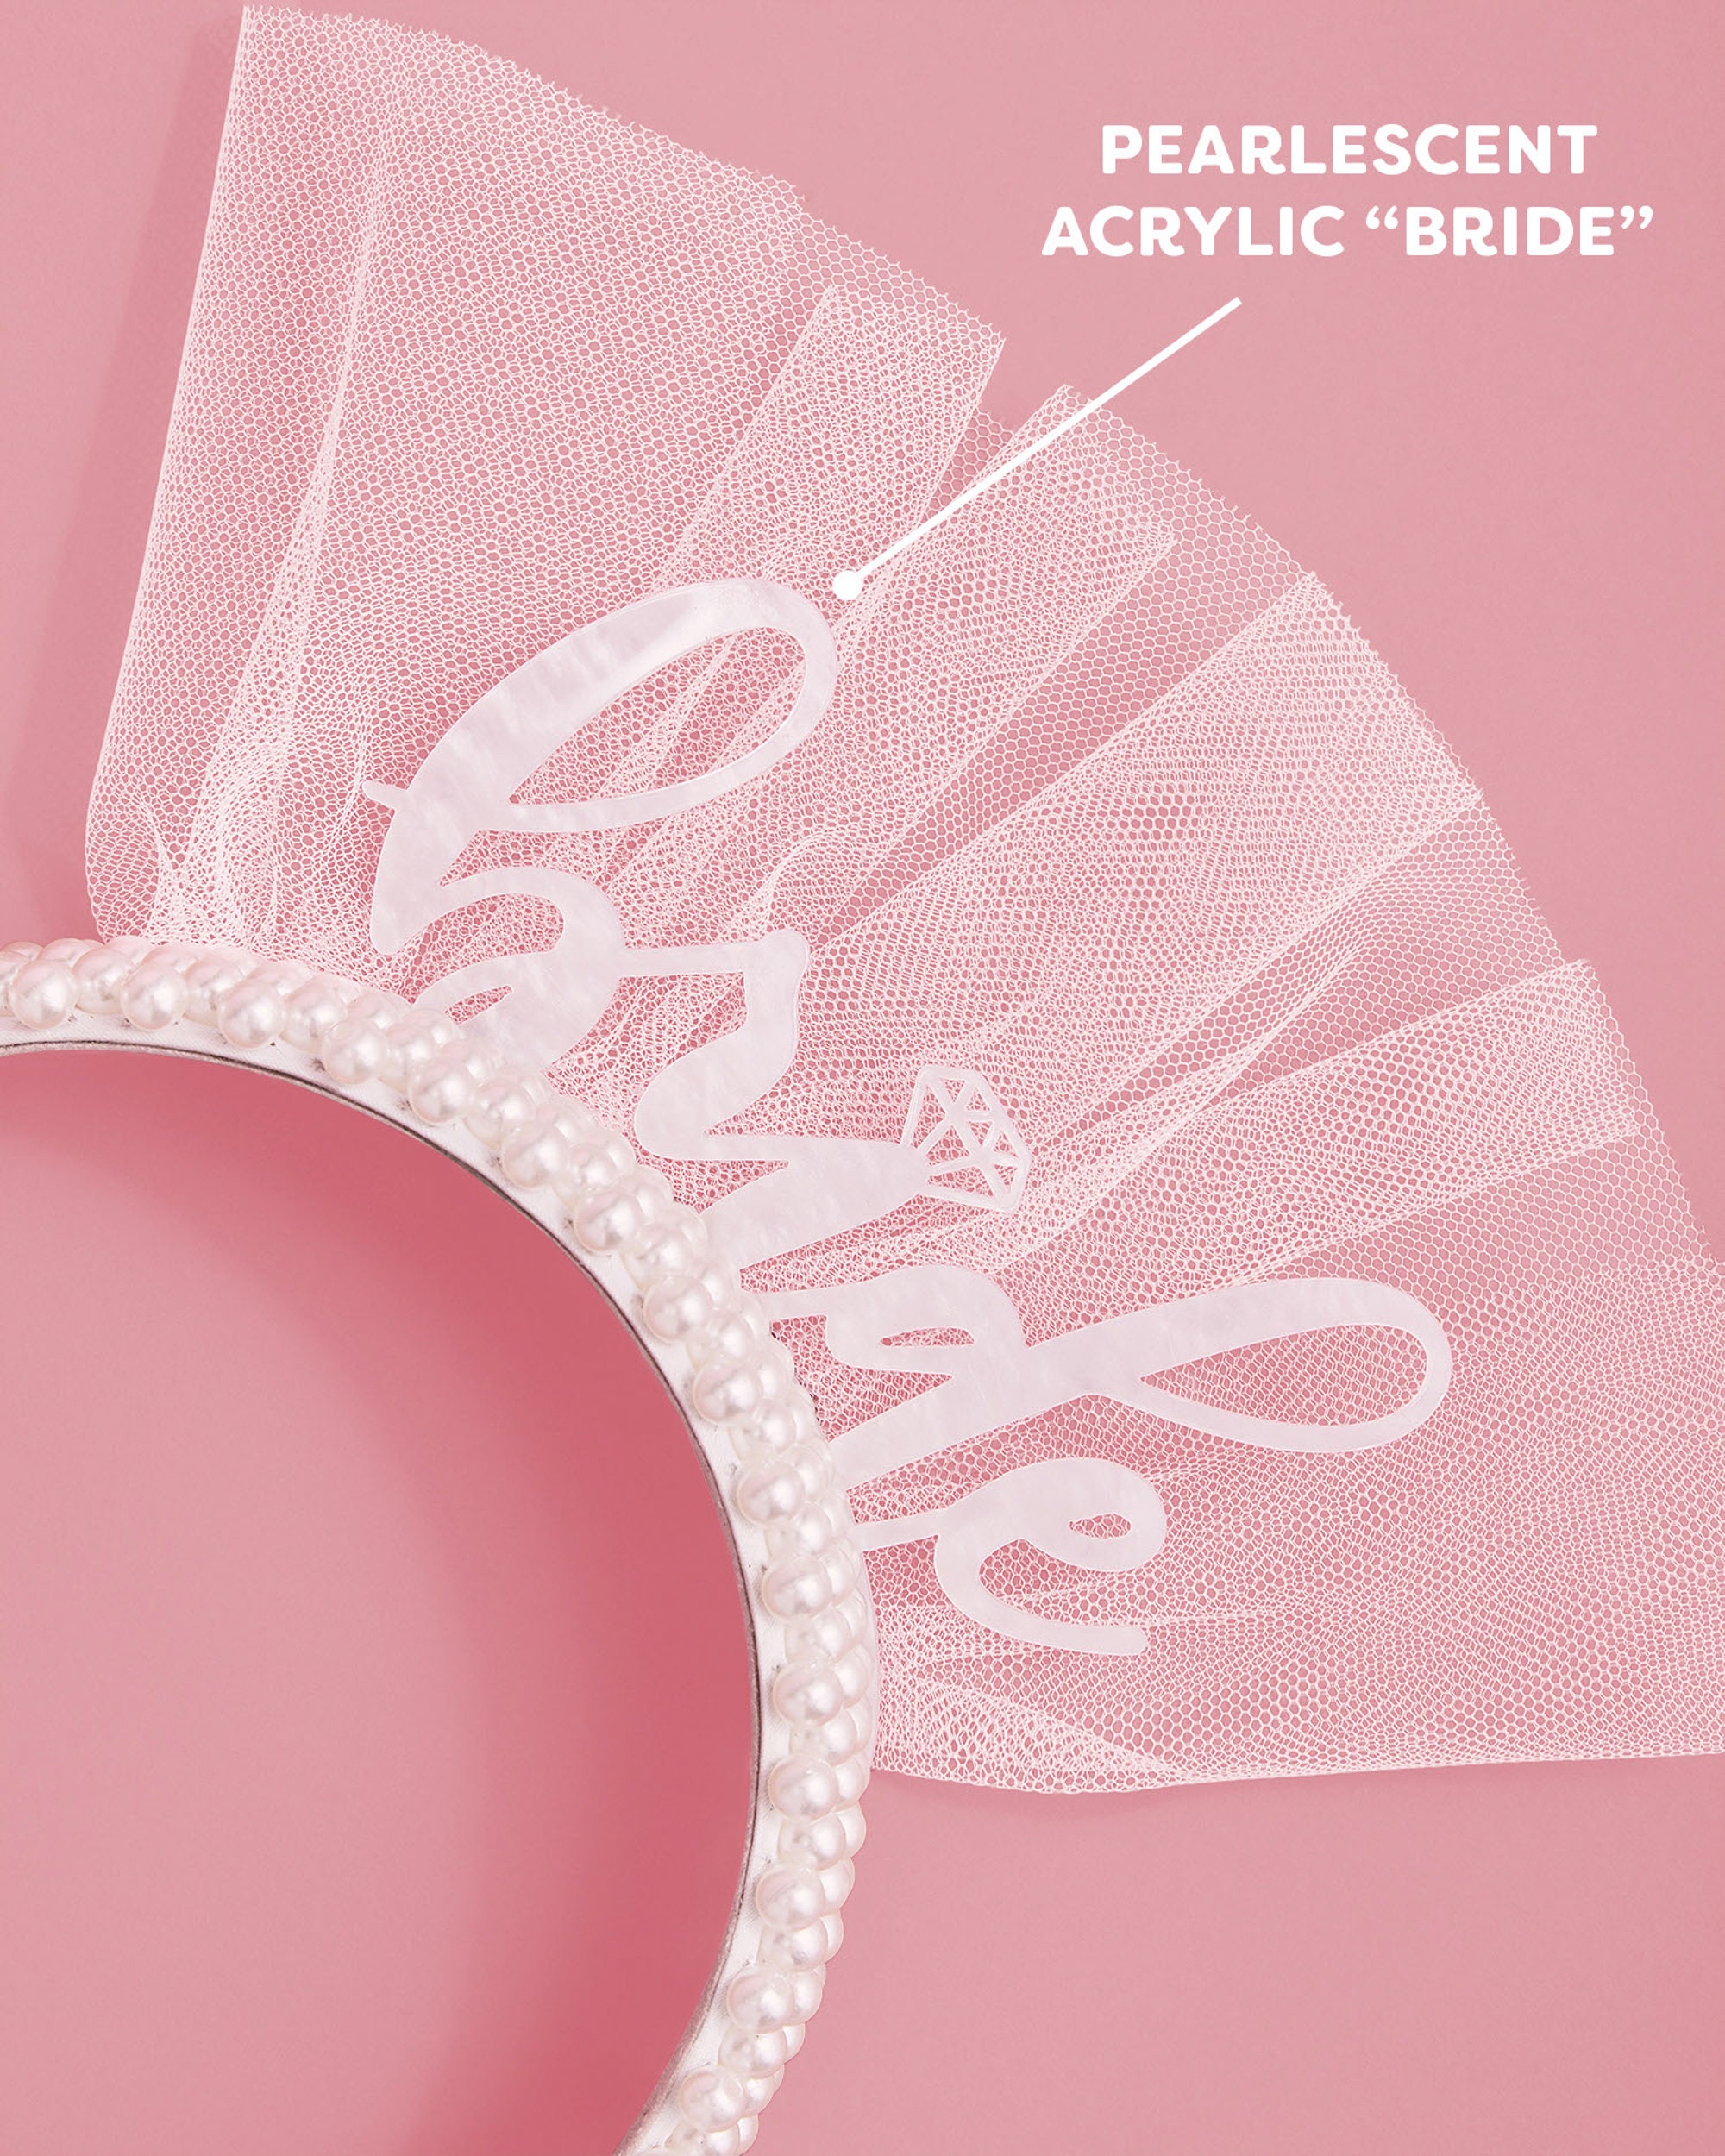 Bachelorette Party Favors 12 Pack Diamond Hair Ties Card Bride Bridesmaids  Hair Accessories Bridal Shower Wedding Decorations White Rose Gold Bands  Pink Party Supplies (24 Hair Ties White Pink) Diamond 12pack White P